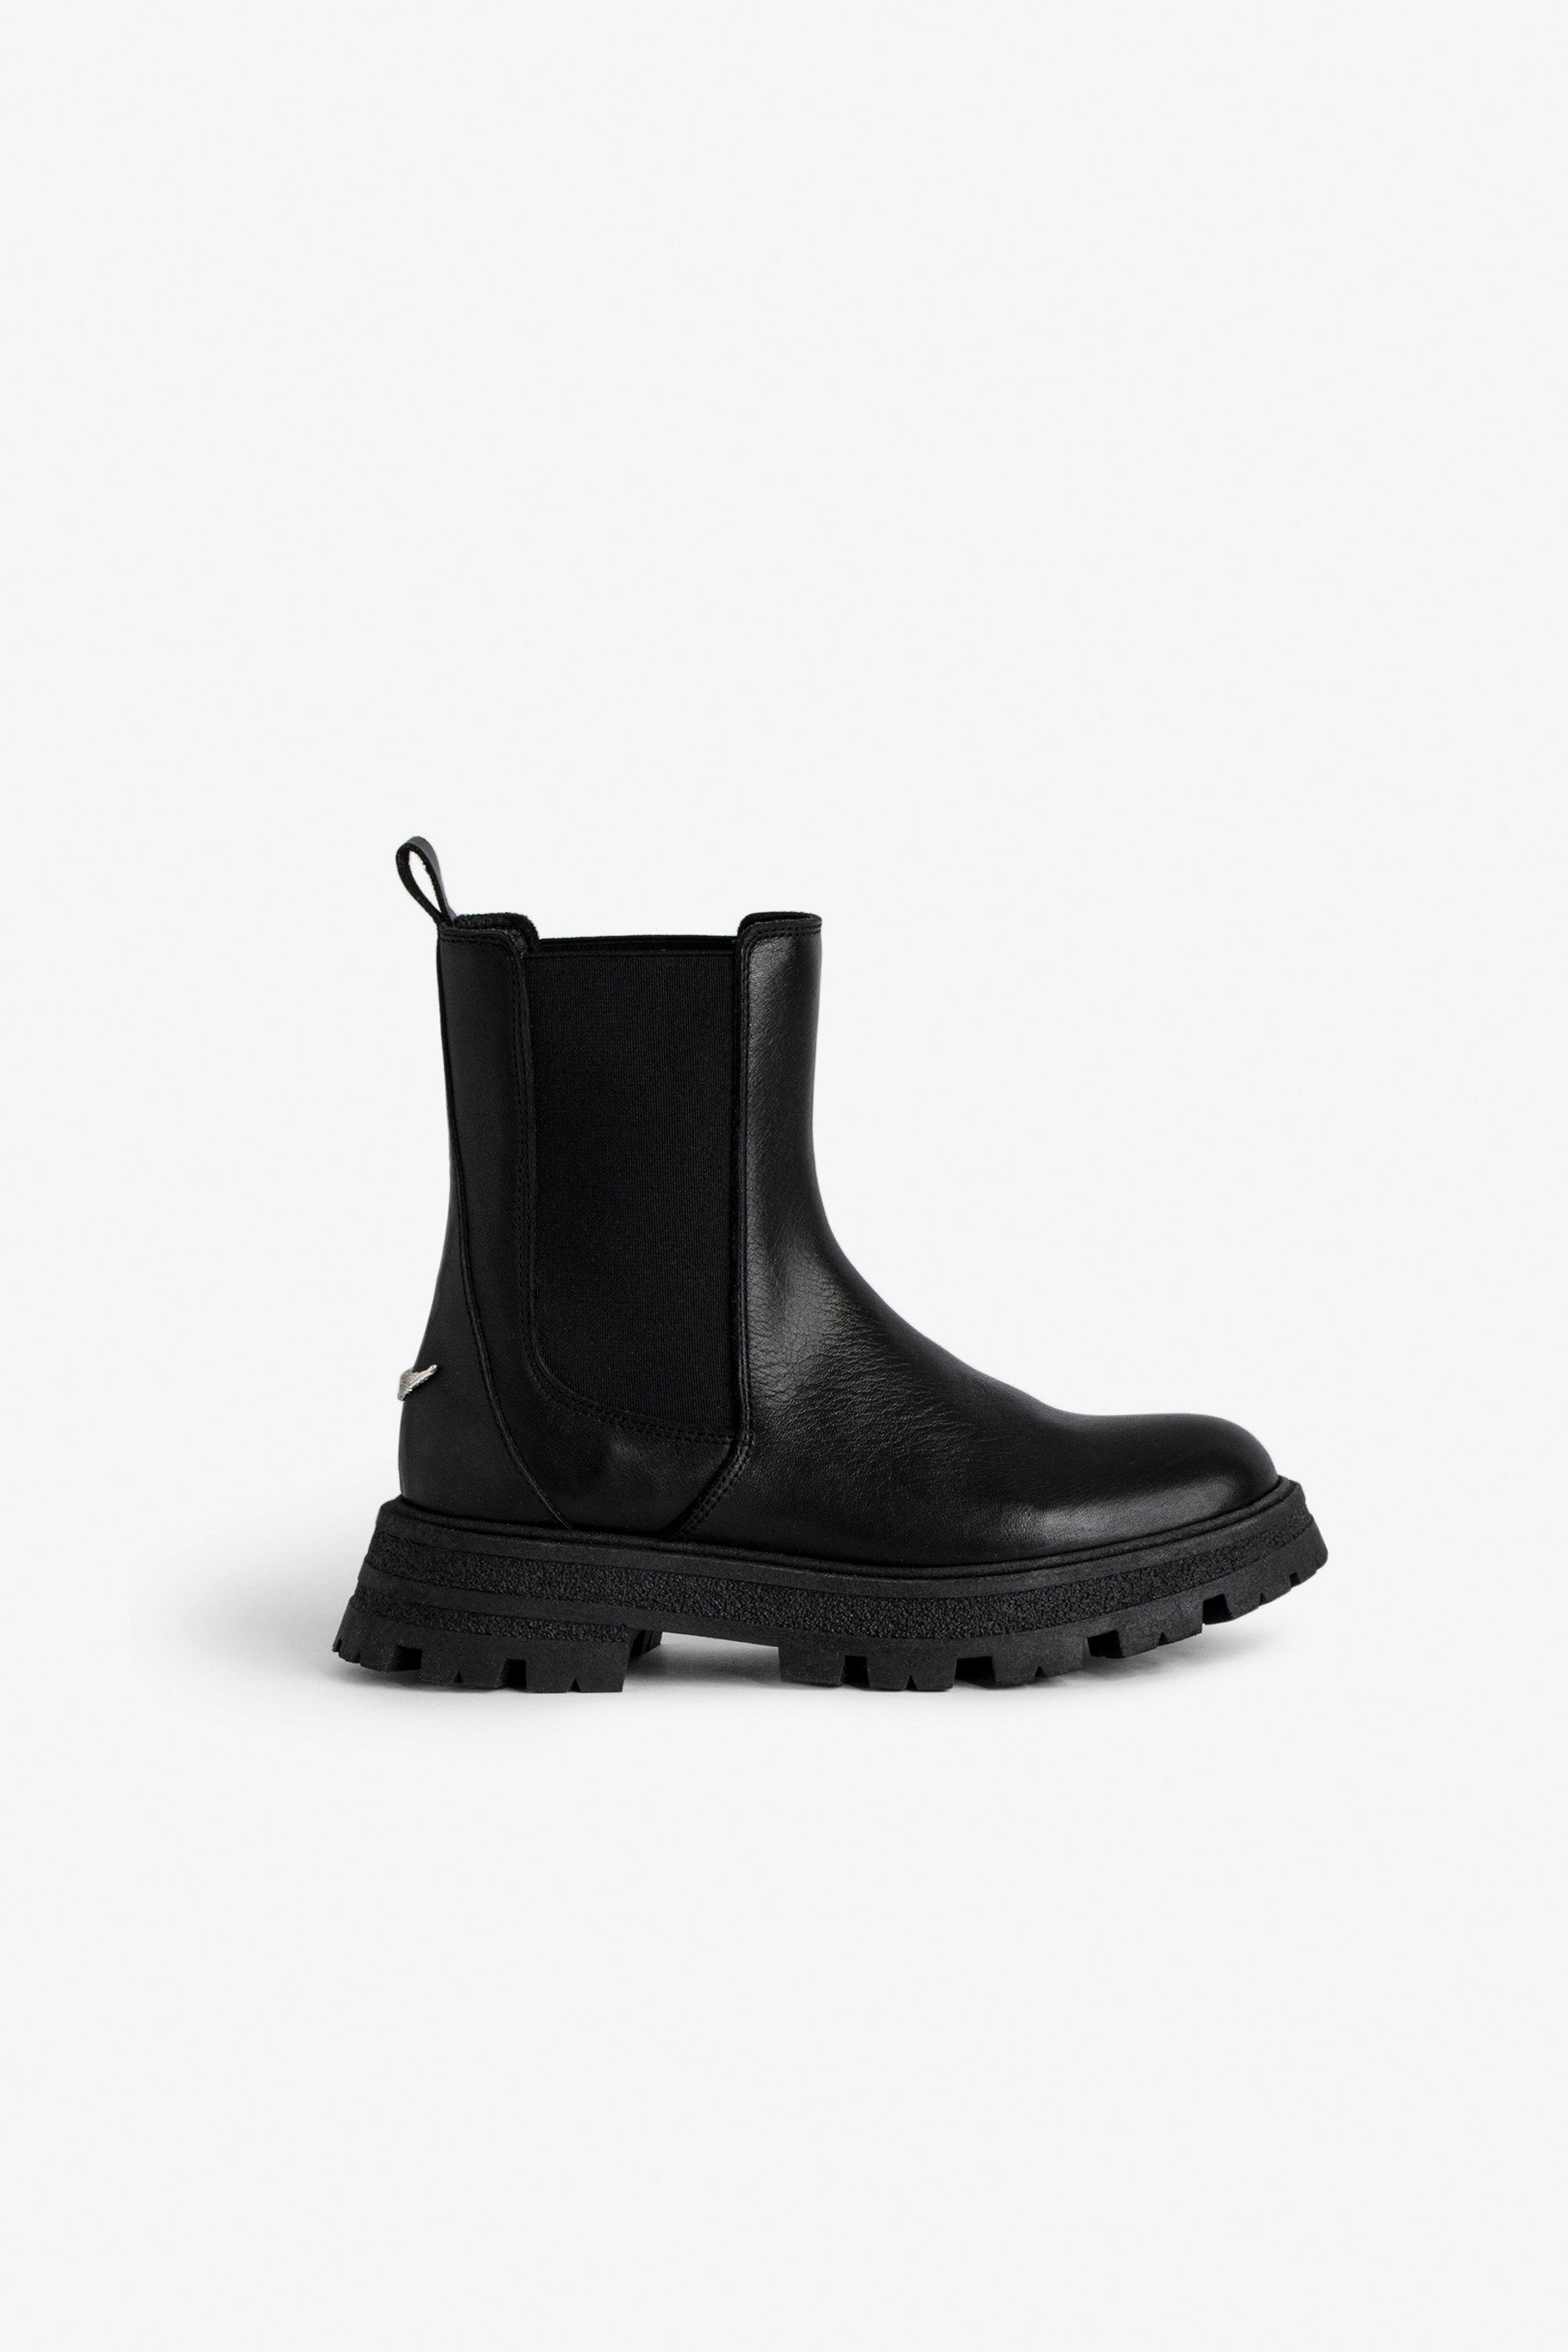 Chelsea Girls’ Boots Girls’ black smooth leather Chelsea boots with wings.